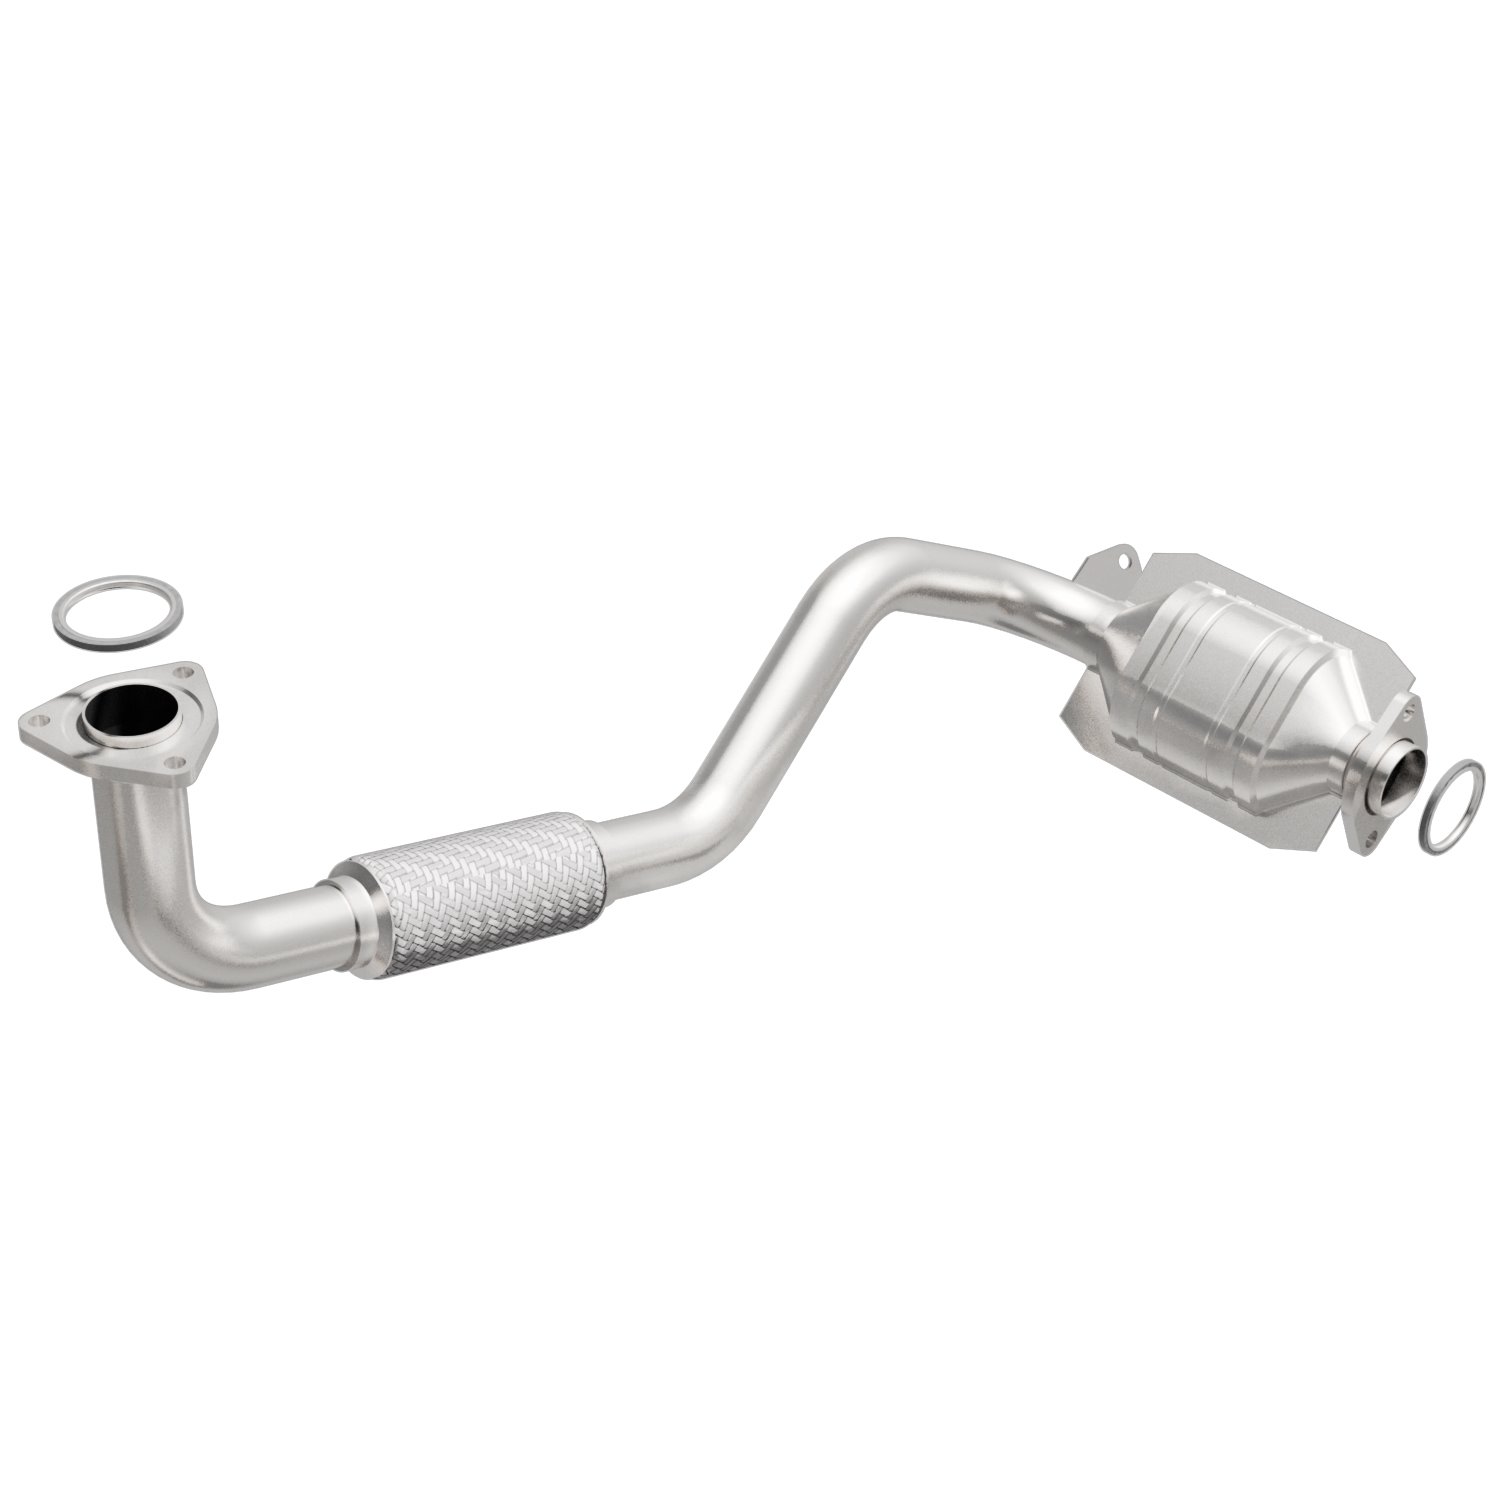 1991-1995 Toyota MR2 Standard Grade Federal / EPA Compliant Direct-Fit Catalytic Converter